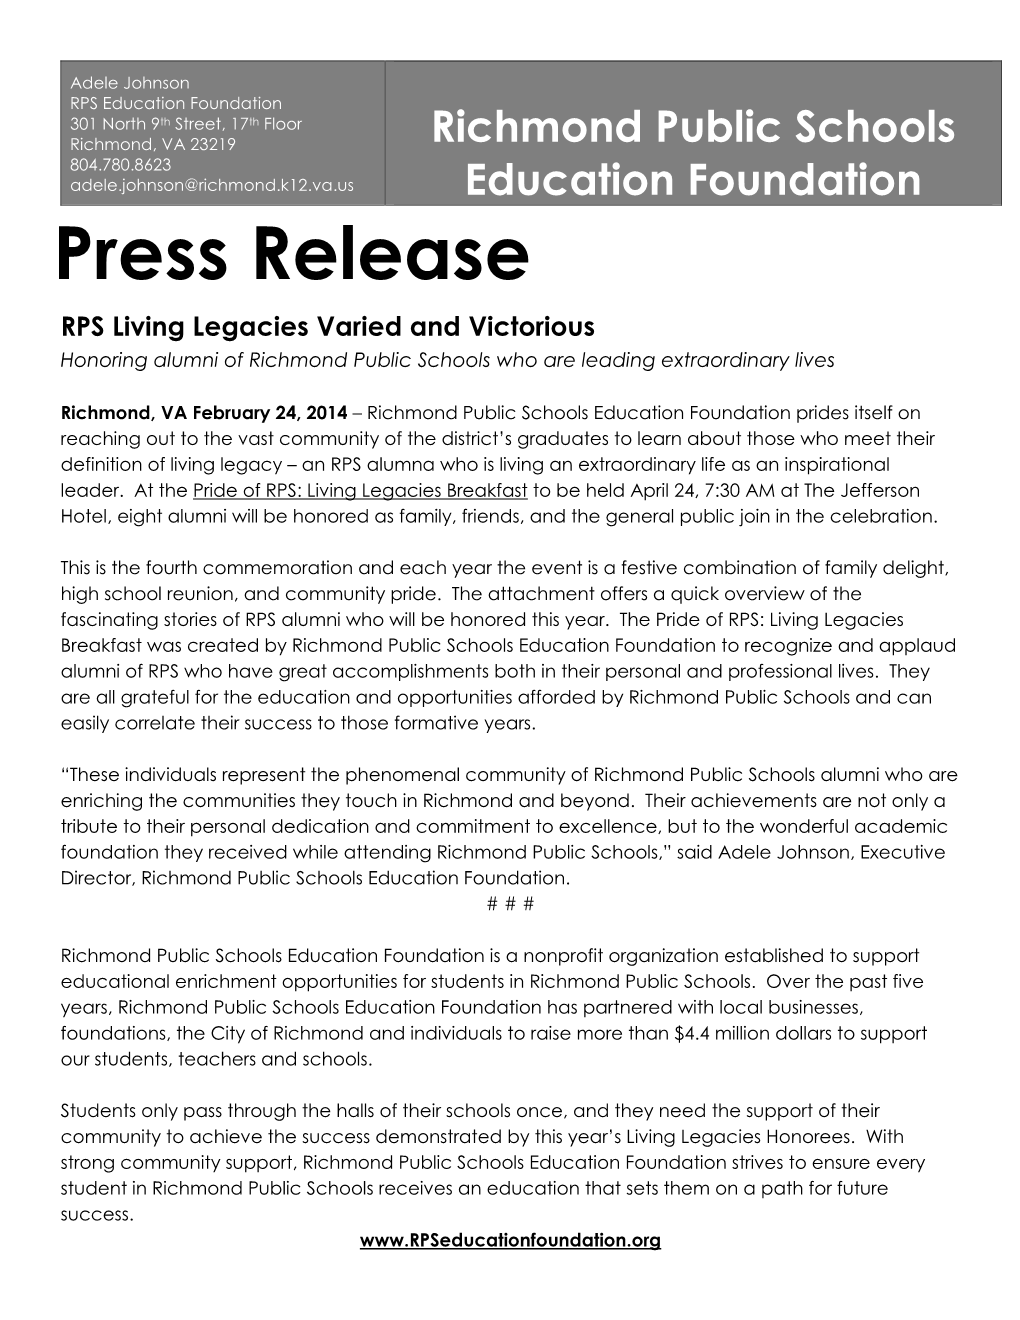 Press Release RPS Living Legacies Varied and Victorious Honoring Alumni of Richmond Public Schools Who Are Leading Extraordinary Lives